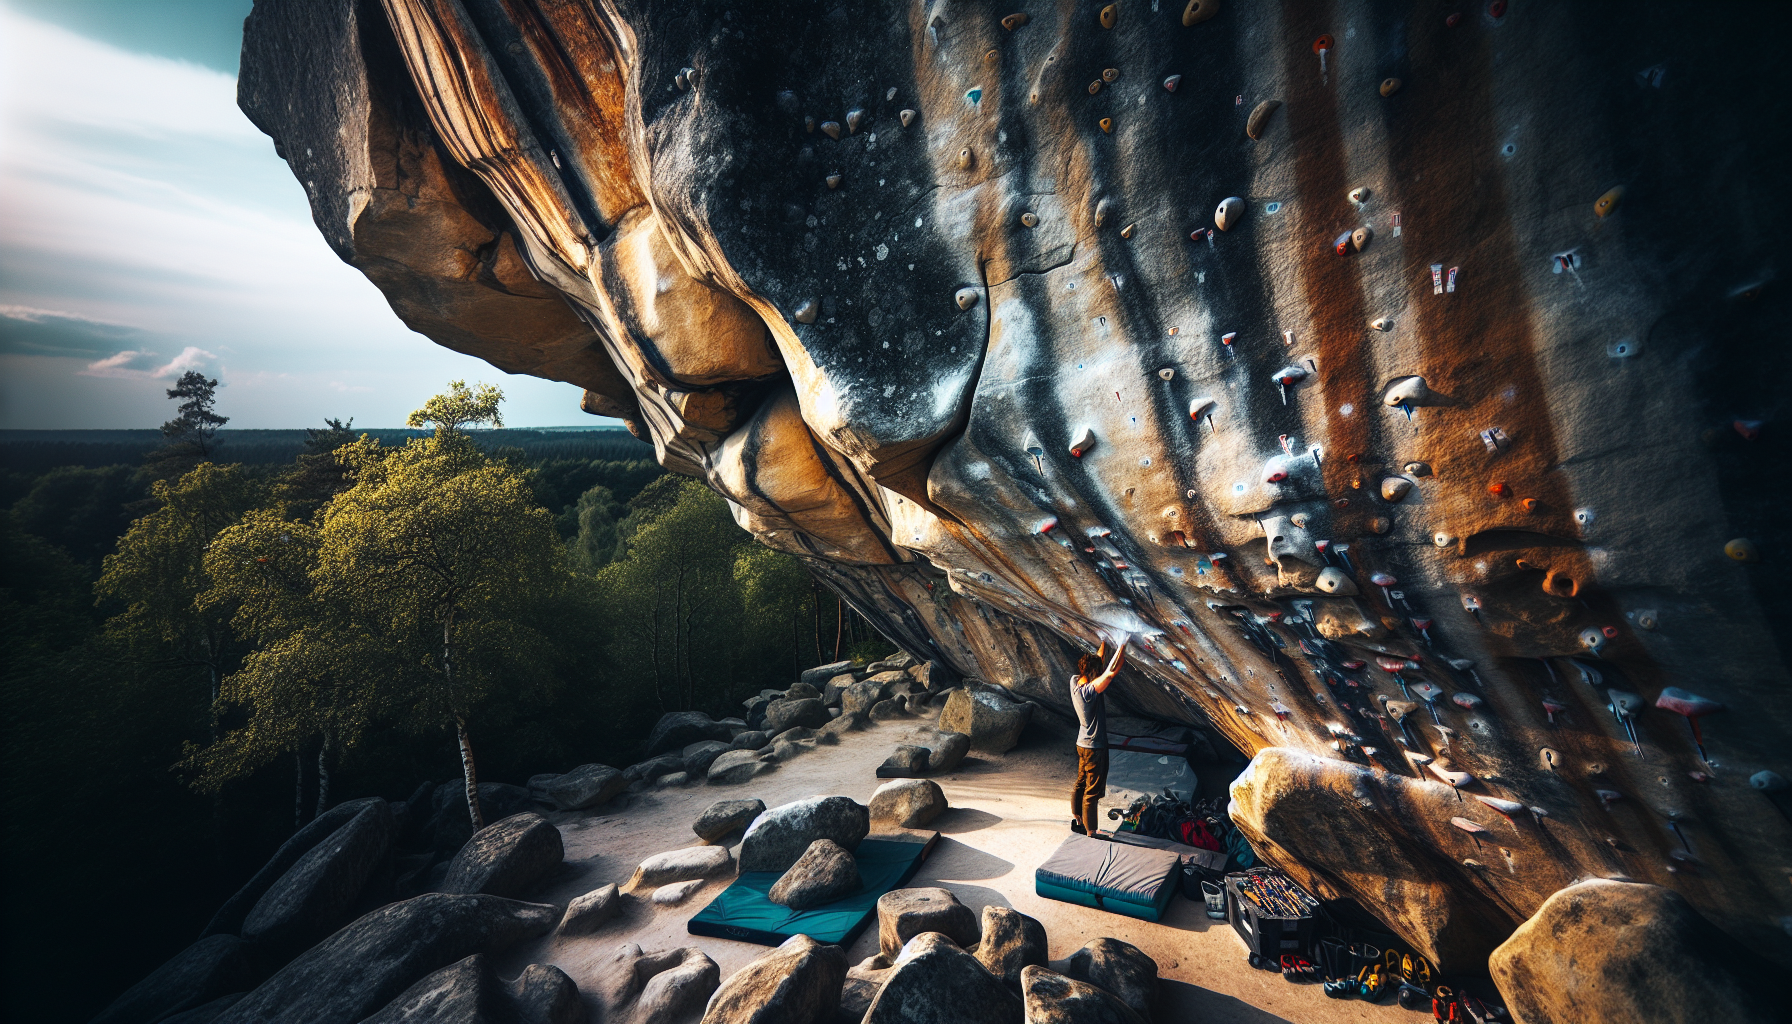 What Is The History Of Climbing In Fontainebleau?